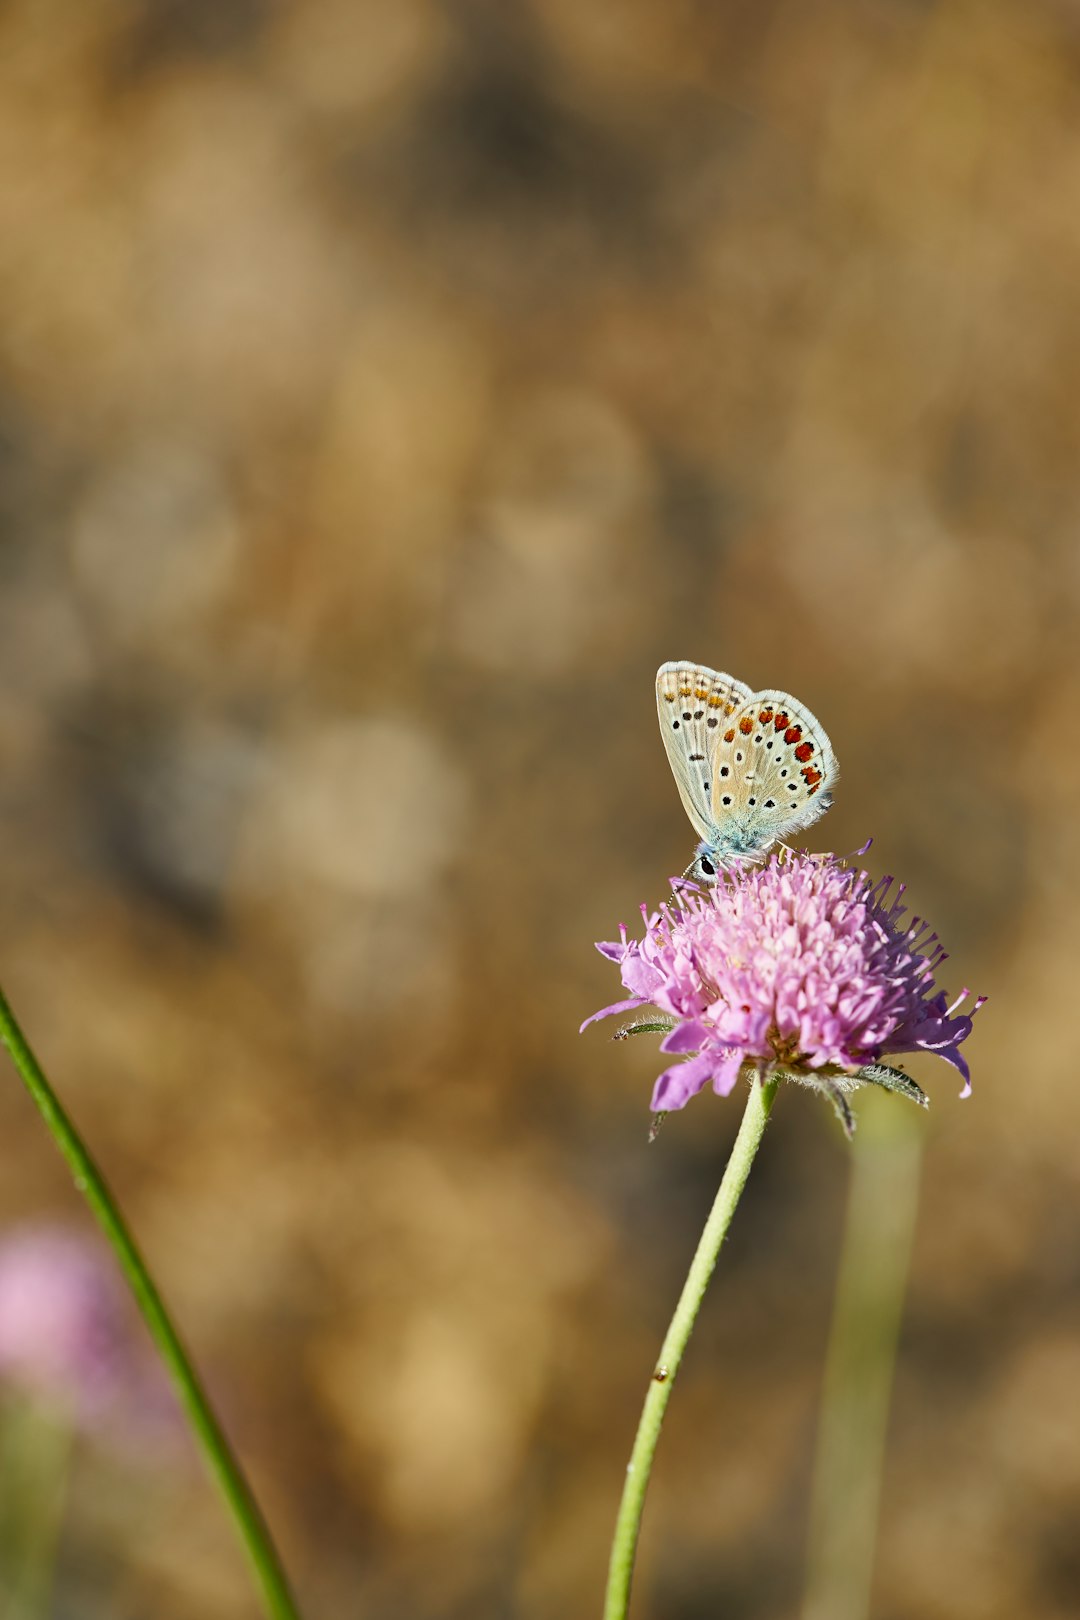 white and brown butterfly perched on purple flower in close up photography during daytime